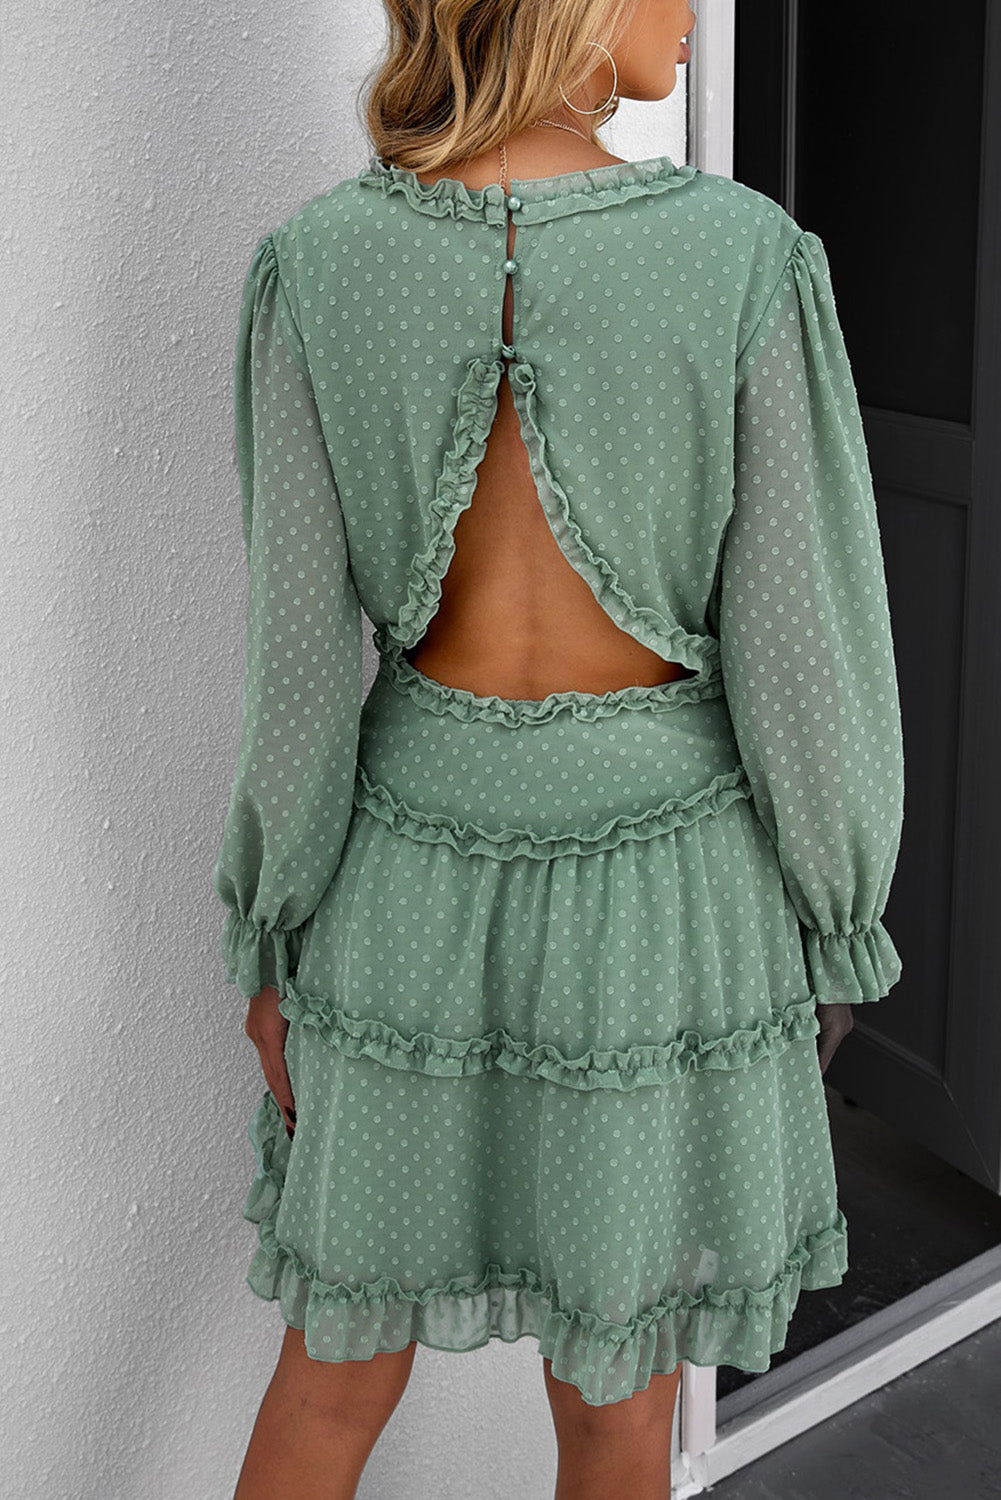 Robe Patineuse Femme Manches Longues Verte A Pois A Volants